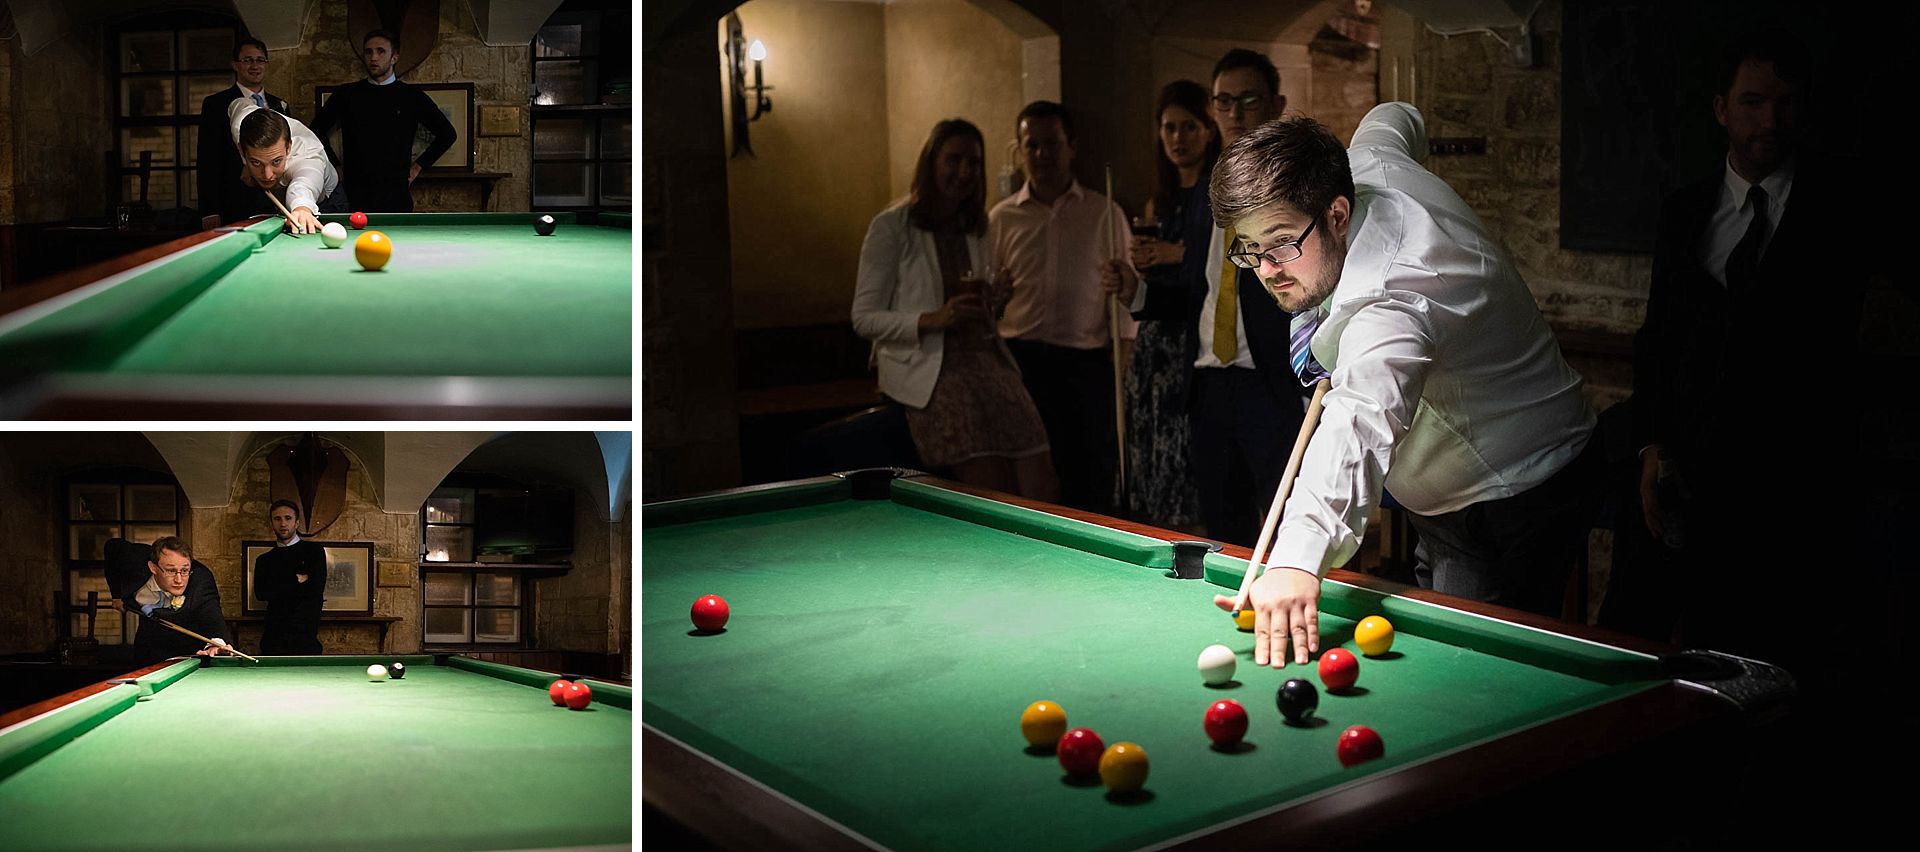 Wedding guests playing snooker